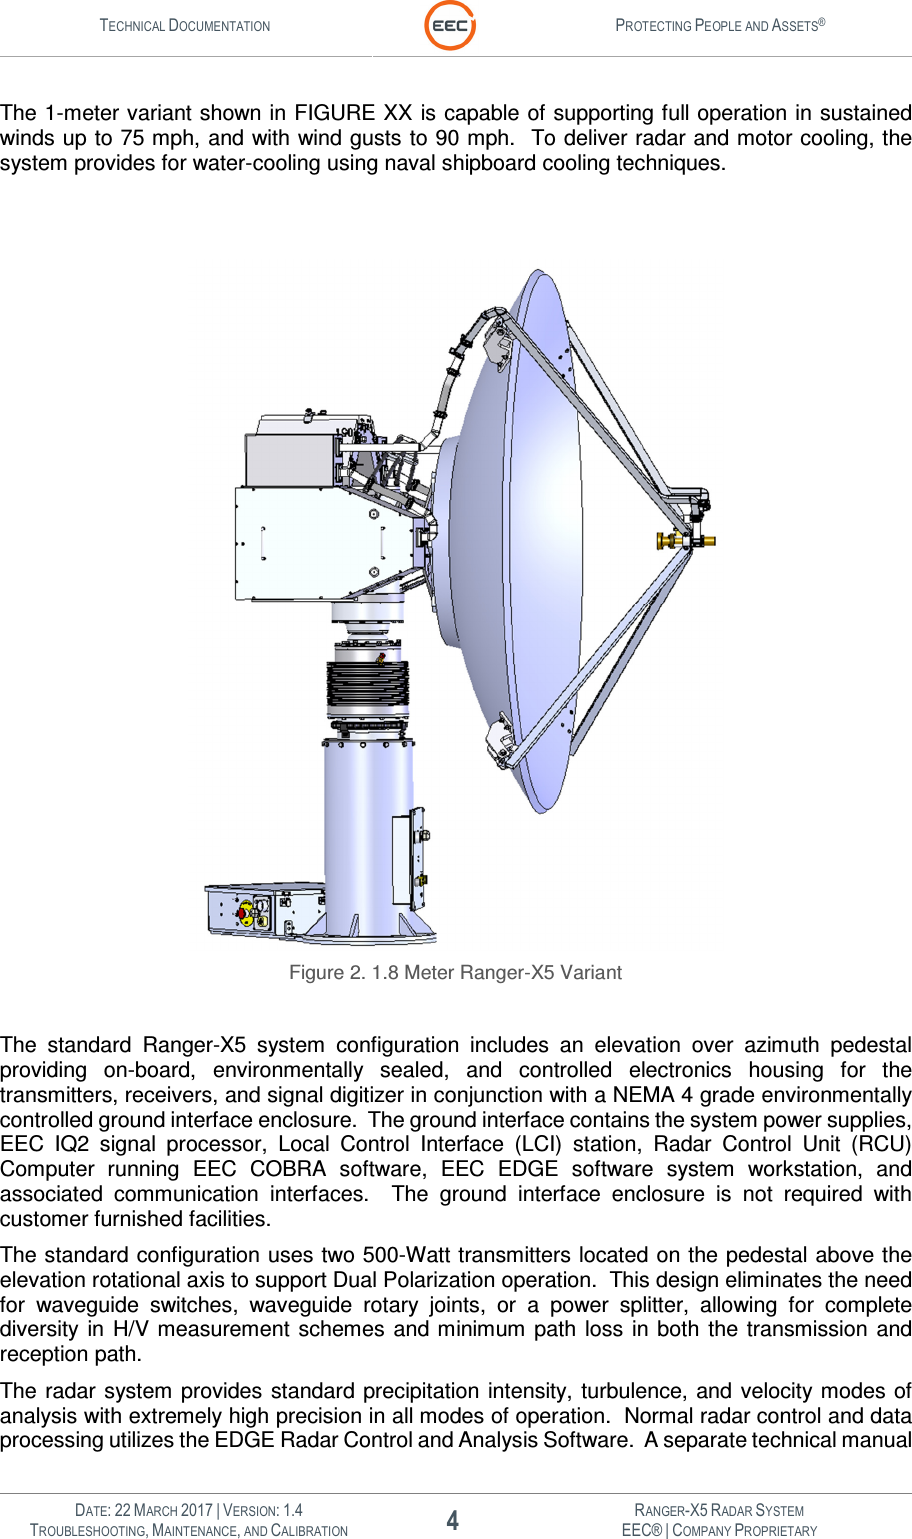 TECHNICAL DOCUMENTATION  PROTECTING PEOPLE AND ASSETS®   DATE: 22 MARCH 2017 | VERSION: 1.4 4 RANGER-X5 RADAR SYSTEM TROUBLESHOOTING, MAINTENANCE, AND CALIBRATION EEC® | COMPANY PROPRIETARY  The 1-meter variant shown in FIGURE XX is capable of supporting full operation in sustained winds up to 75 mph, and with wind gusts to 90 mph.  To deliver radar and motor cooling, the system provides for water-cooling using naval shipboard cooling techniques.      Figure 2. 1.8 Meter Ranger-X5 Variant  The  standard  Ranger-X5  system  configuration  includes  an  elevation  over  azimuth  pedestal providing  on-board,  environmentally  sealed,  and  controlled  electronics  housing  for  the transmitters, receivers, and signal digitizer in conjunction with a NEMA 4 grade environmentally controlled ground interface enclosure.  The ground interface contains the system power supplies, EEC  IQ2  signal  processor,  Local  Control  Interface  (LCI)  station,  Radar  Control  Unit  (RCU) Computer  running  EEC  COBRA  software,  EEC  EDGE  software  system  workstation,  and associated  communication  interfaces.    The  ground  interface  enclosure  is  not  required  with customer furnished facilities. The standard configuration uses two 500-Watt transmitters located on the pedestal above the elevation rotational axis to support Dual Polarization operation.  This design eliminates the need for  waveguide  switches,  waveguide  rotary  joints,  or  a  power  splitter,  allowing  for  complete diversity  in  H/V measurement  schemes  and minimum  path  loss  in both  the  transmission  and reception path. The radar system  provides  standard  precipitation  intensity, turbulence, and velocity modes of analysis with extremely high precision in all modes of operation.  Normal radar control and data processing utilizes the EDGE Radar Control and Analysis Software.  A separate technical manual 